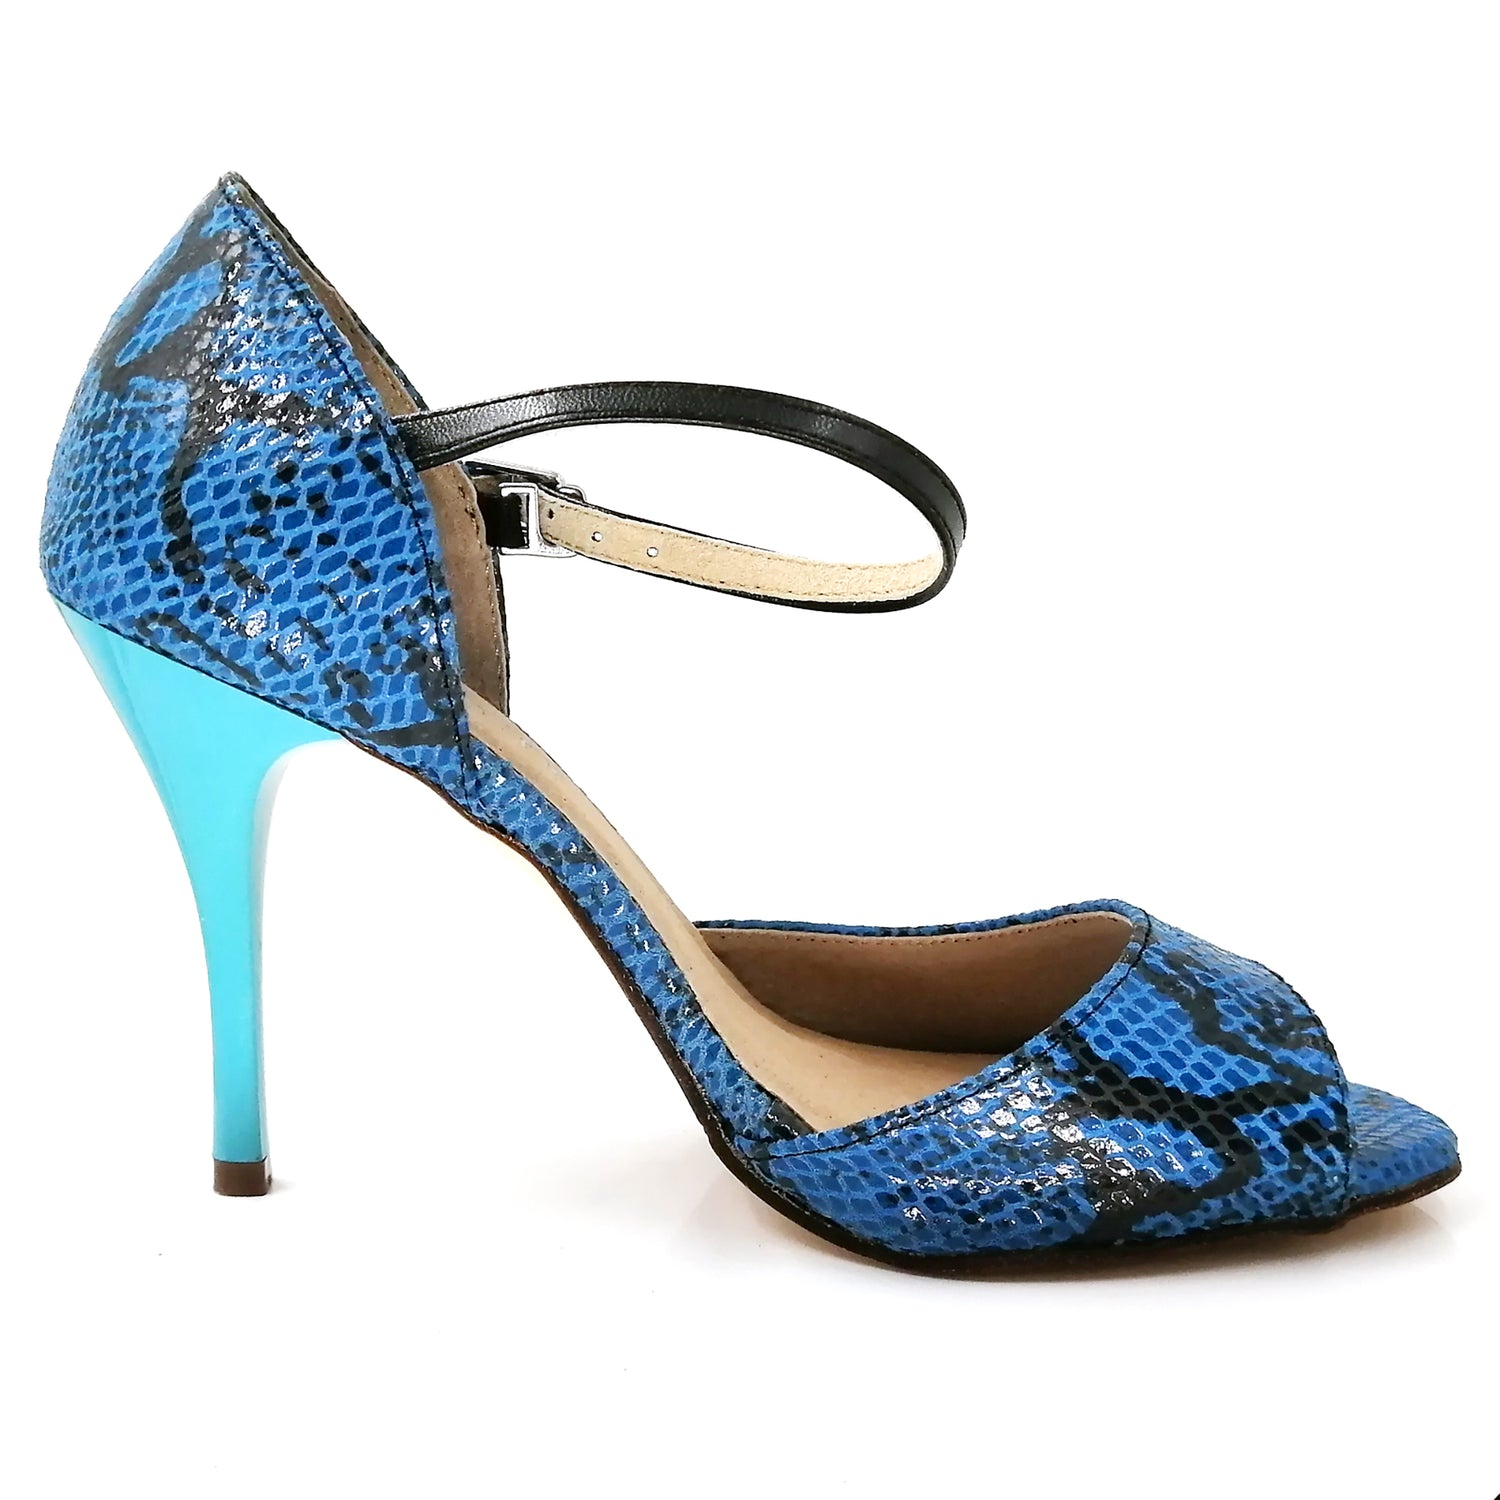 Pro Dancer Argentine Tango High Heel Sandals with Blue Leather Sole - PD-9001E2